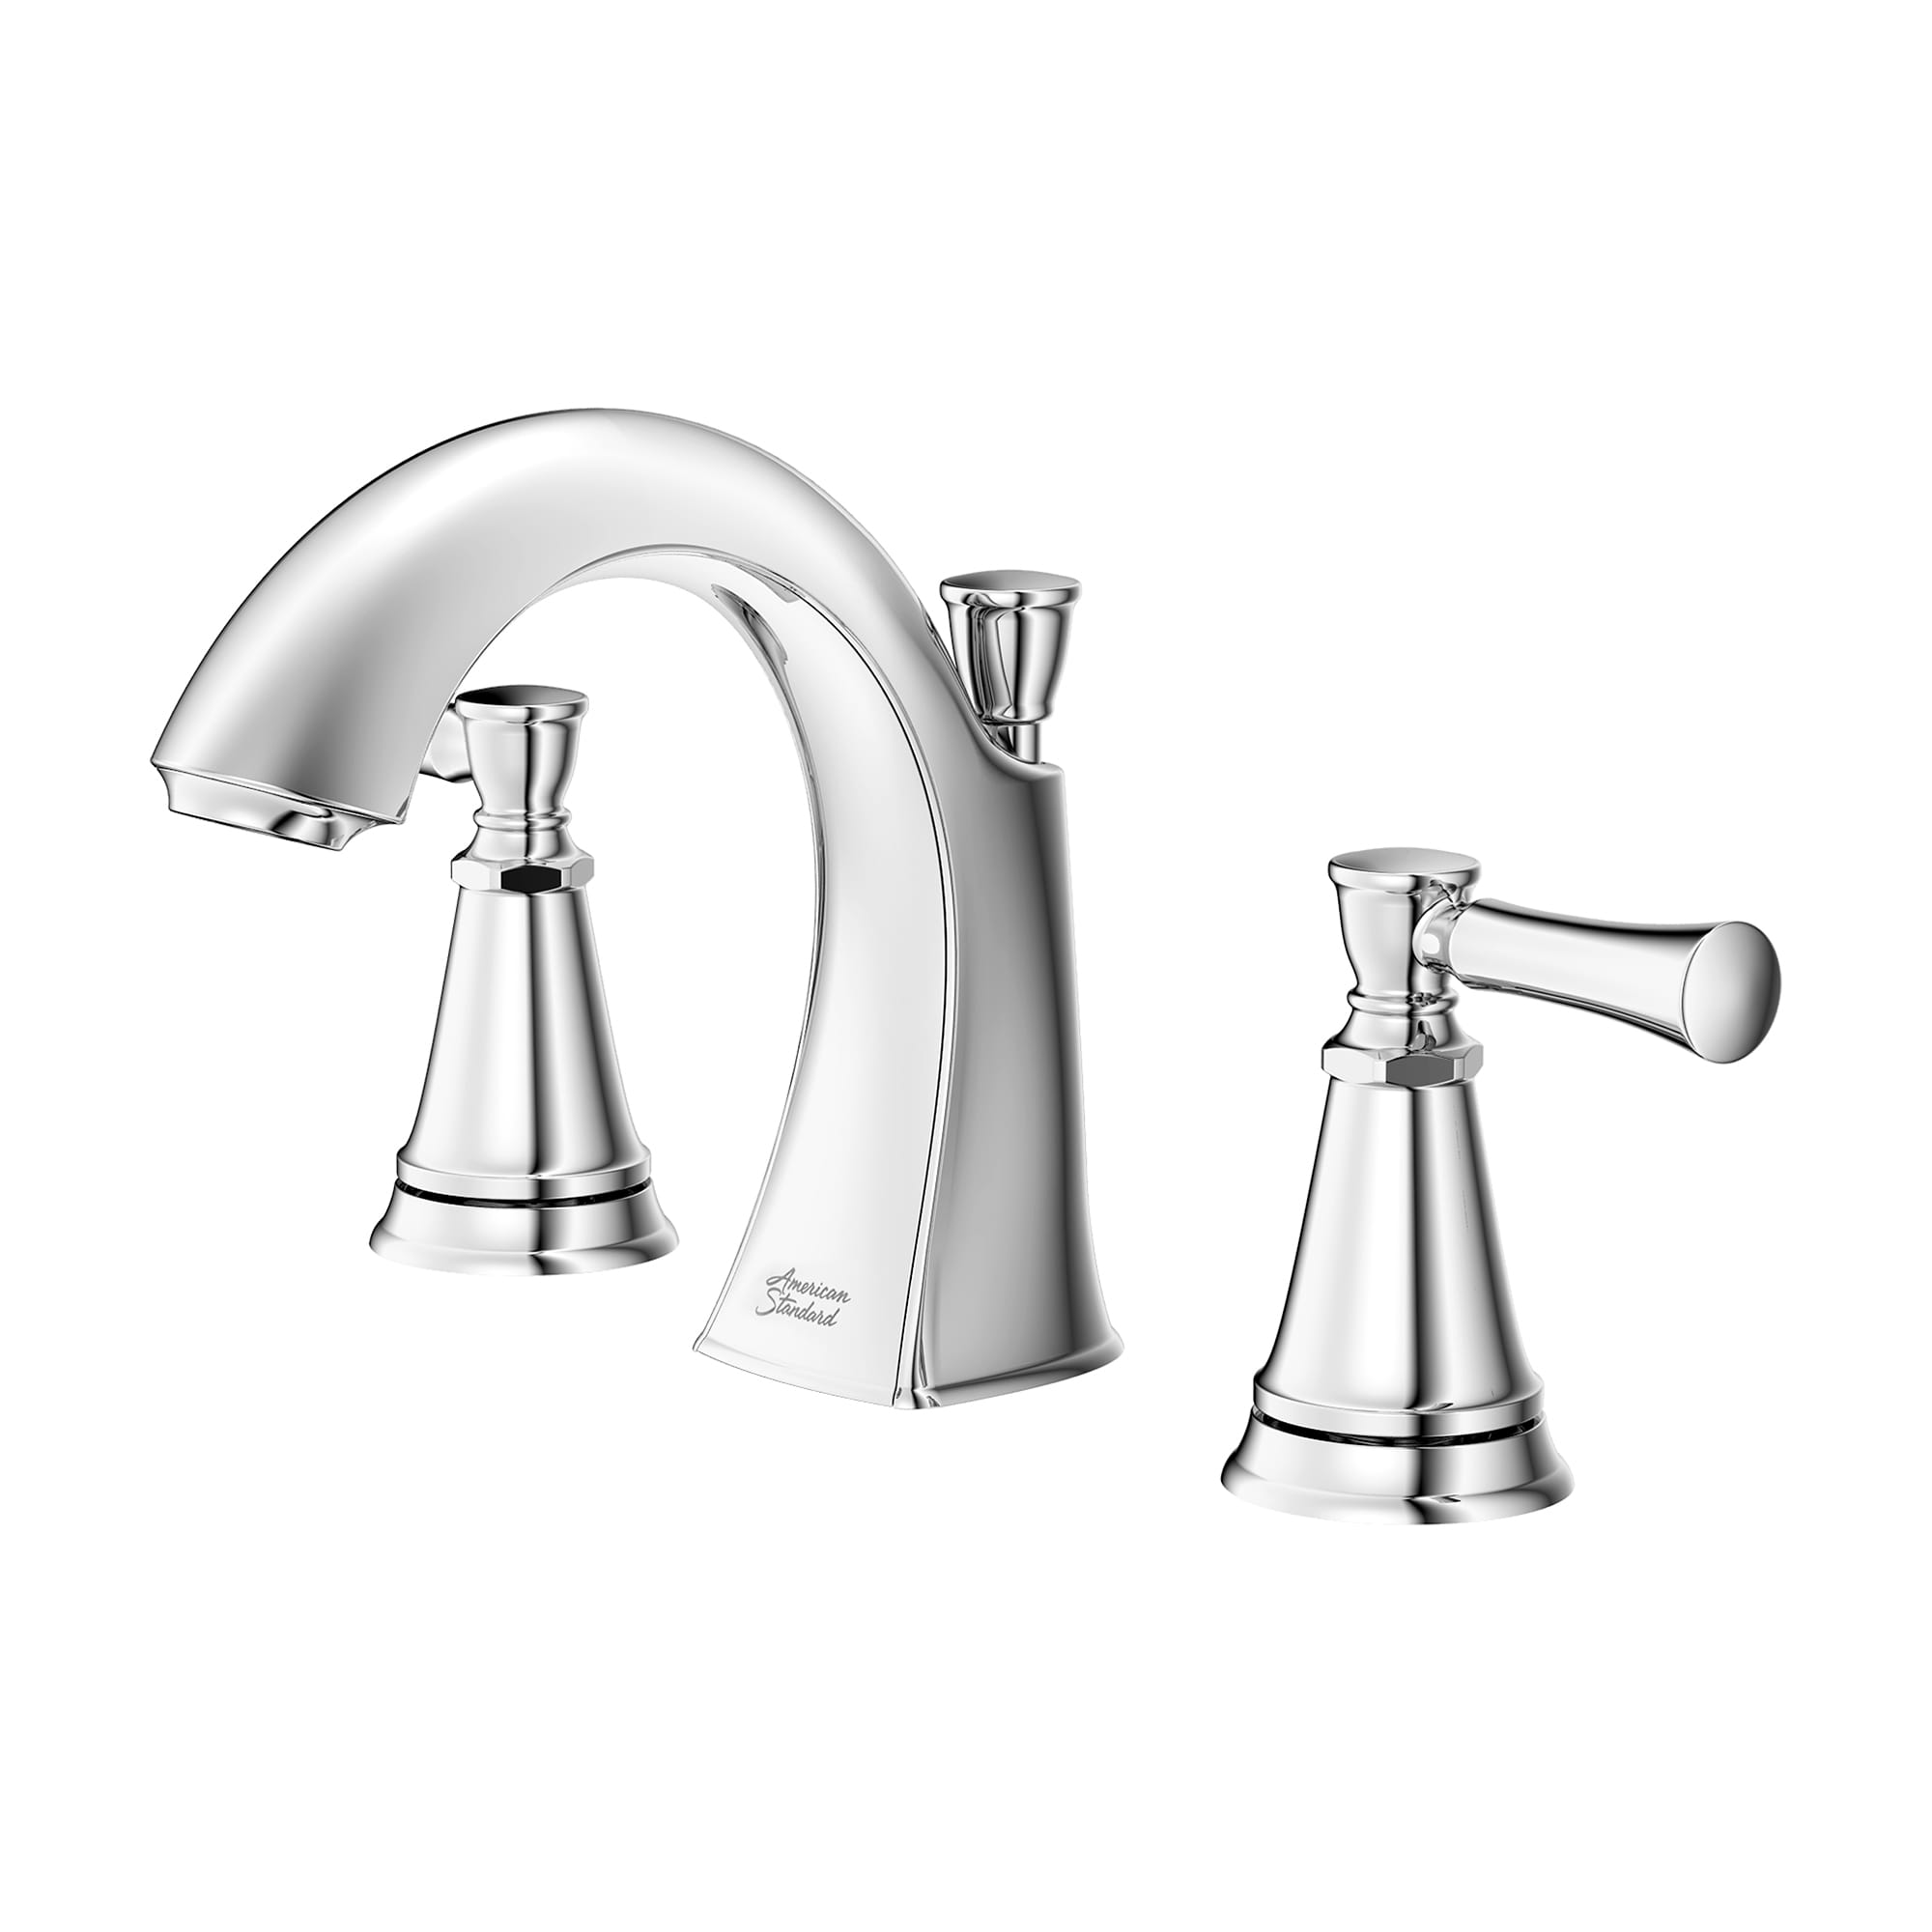 Chancellor 8-In. Widespread 2-Handle Bathroom Faucet, 1.2 GPM with Lever Handles